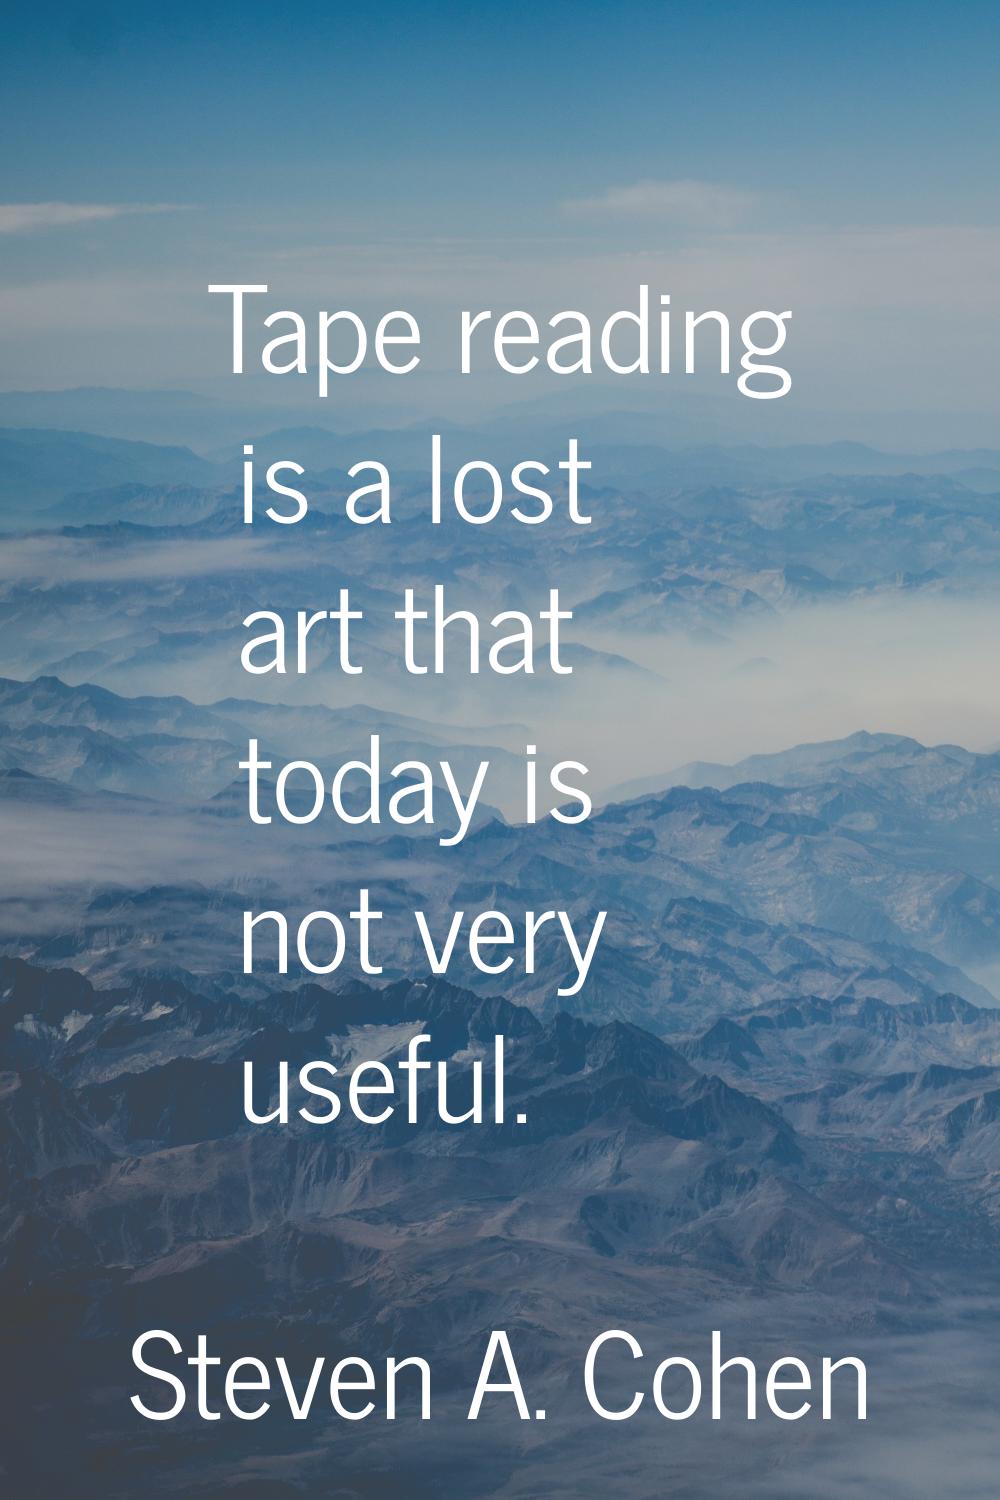 Tape reading is a lost art that today is not very useful.